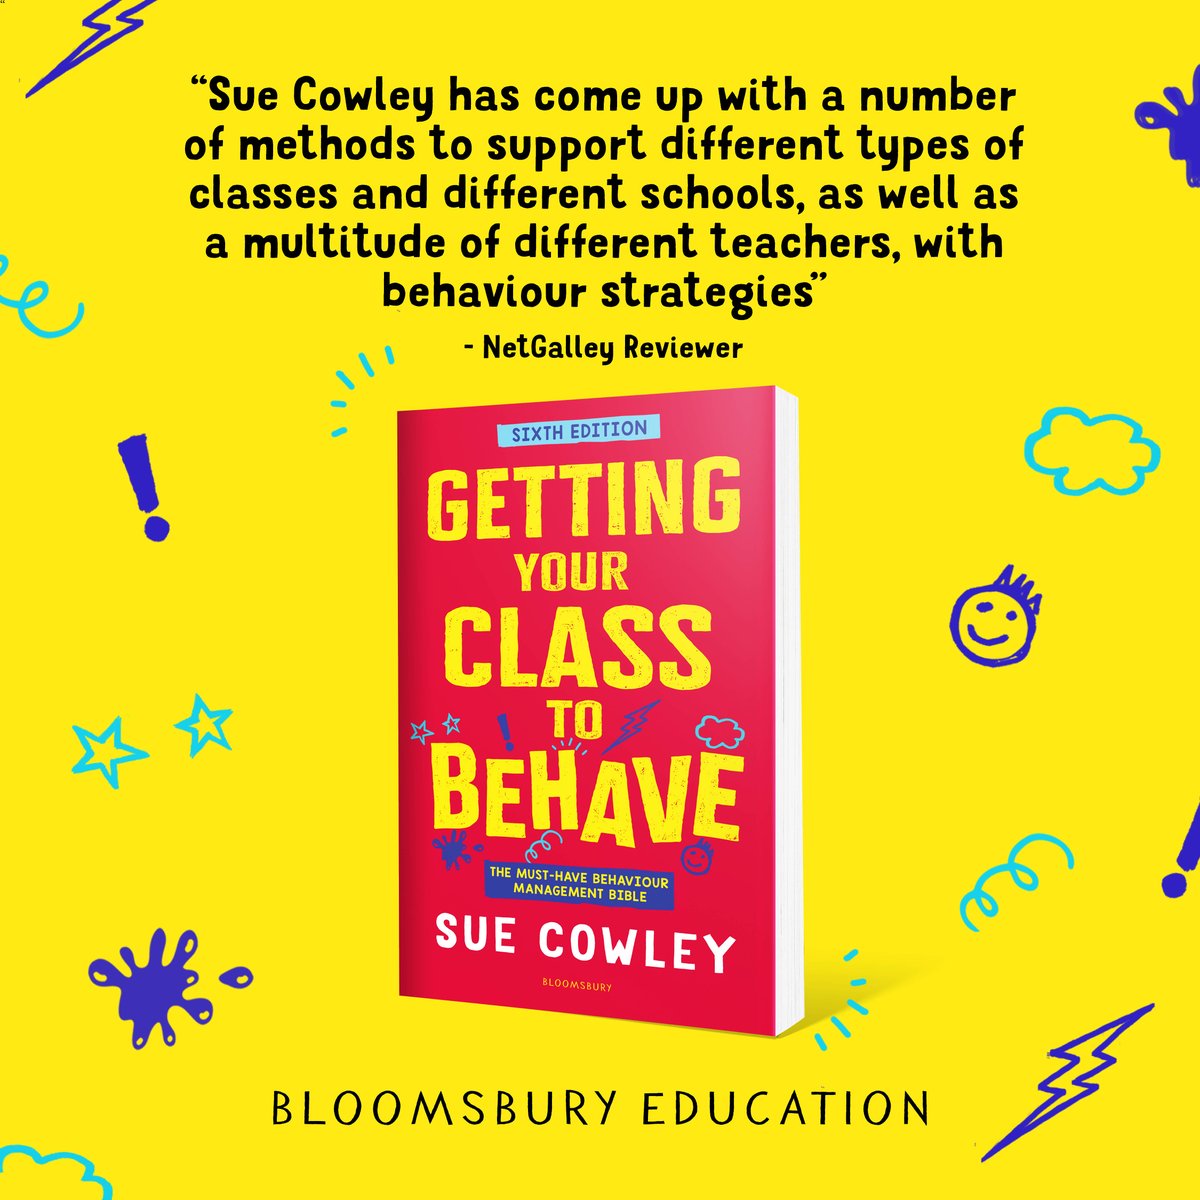 The early reviews are in for the new and updated edition of Getting Your Class to Behave by @Sue_Cowley 🤩 You don't want to miss this guide packed full of behavioural strategies!